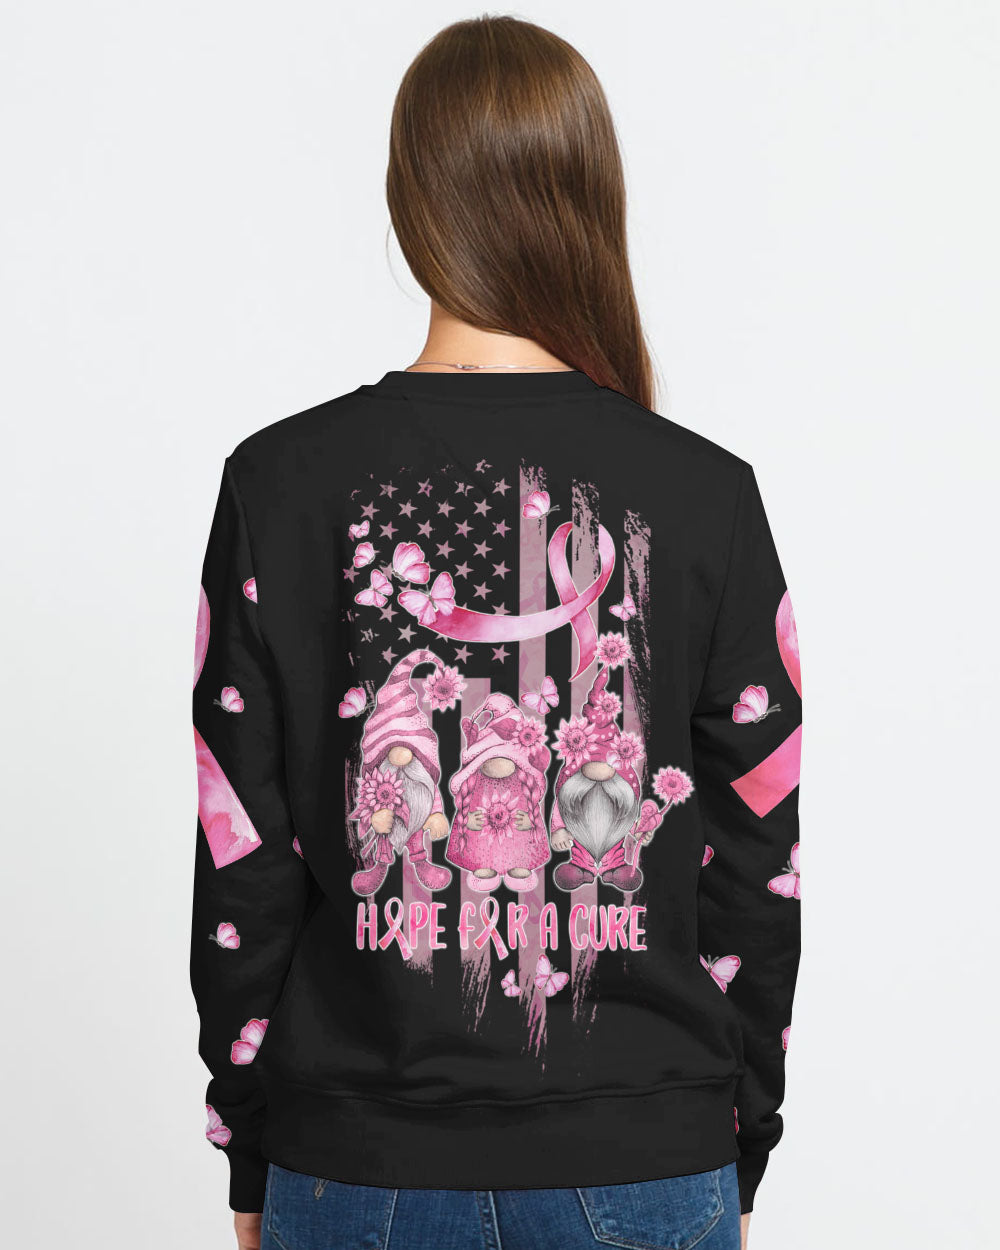 Hope For A Cure Gnome Pink Ribbons Flag Women's Breast Cancer Awareness Sweatshirt